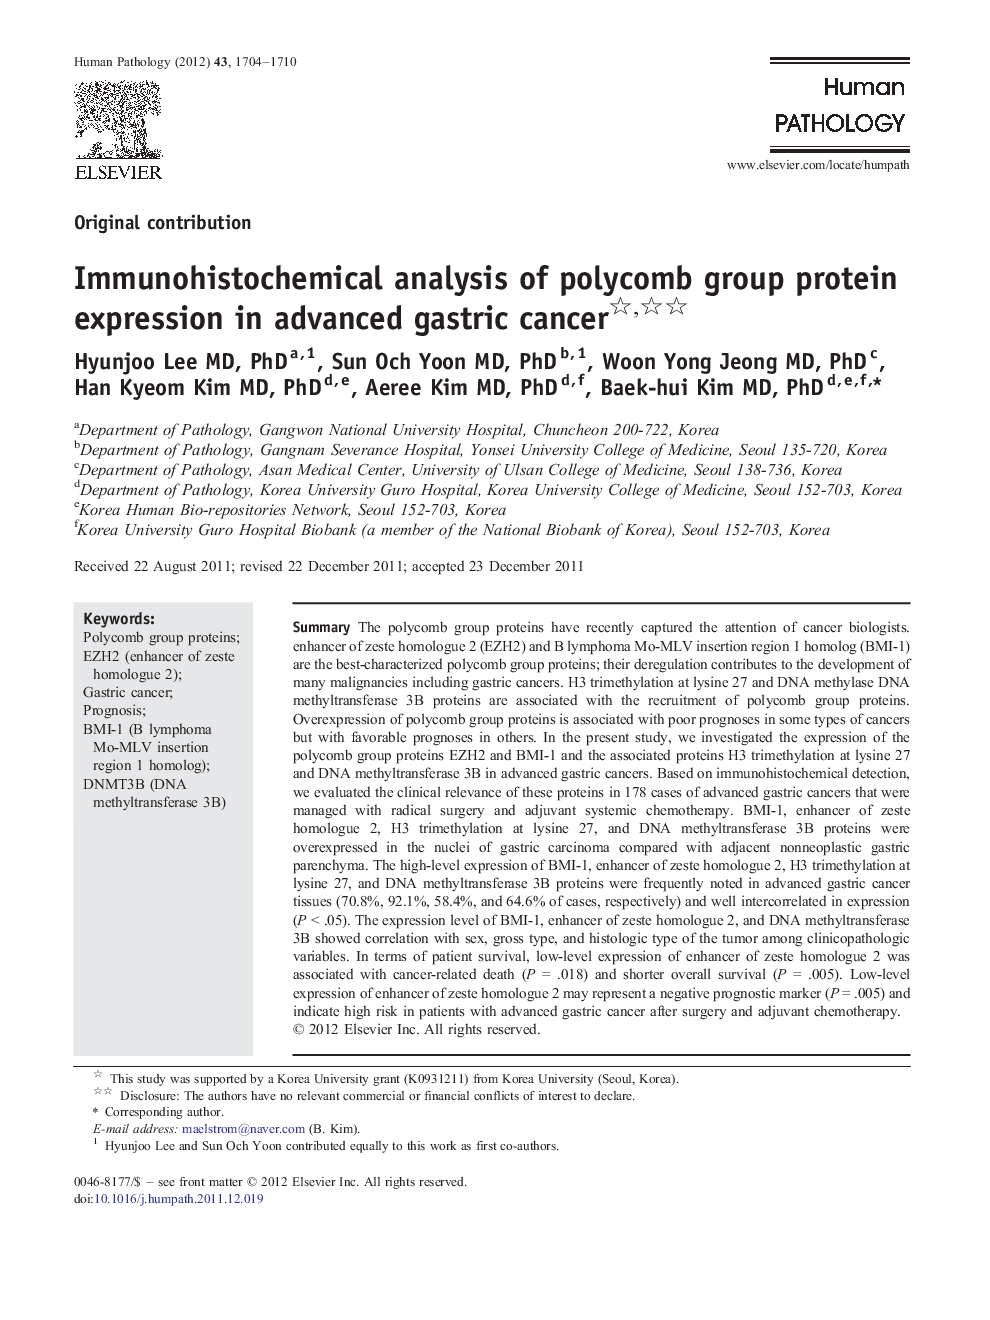 Immunohistochemical analysis of polycomb group protein expression in advanced gastric cancer 